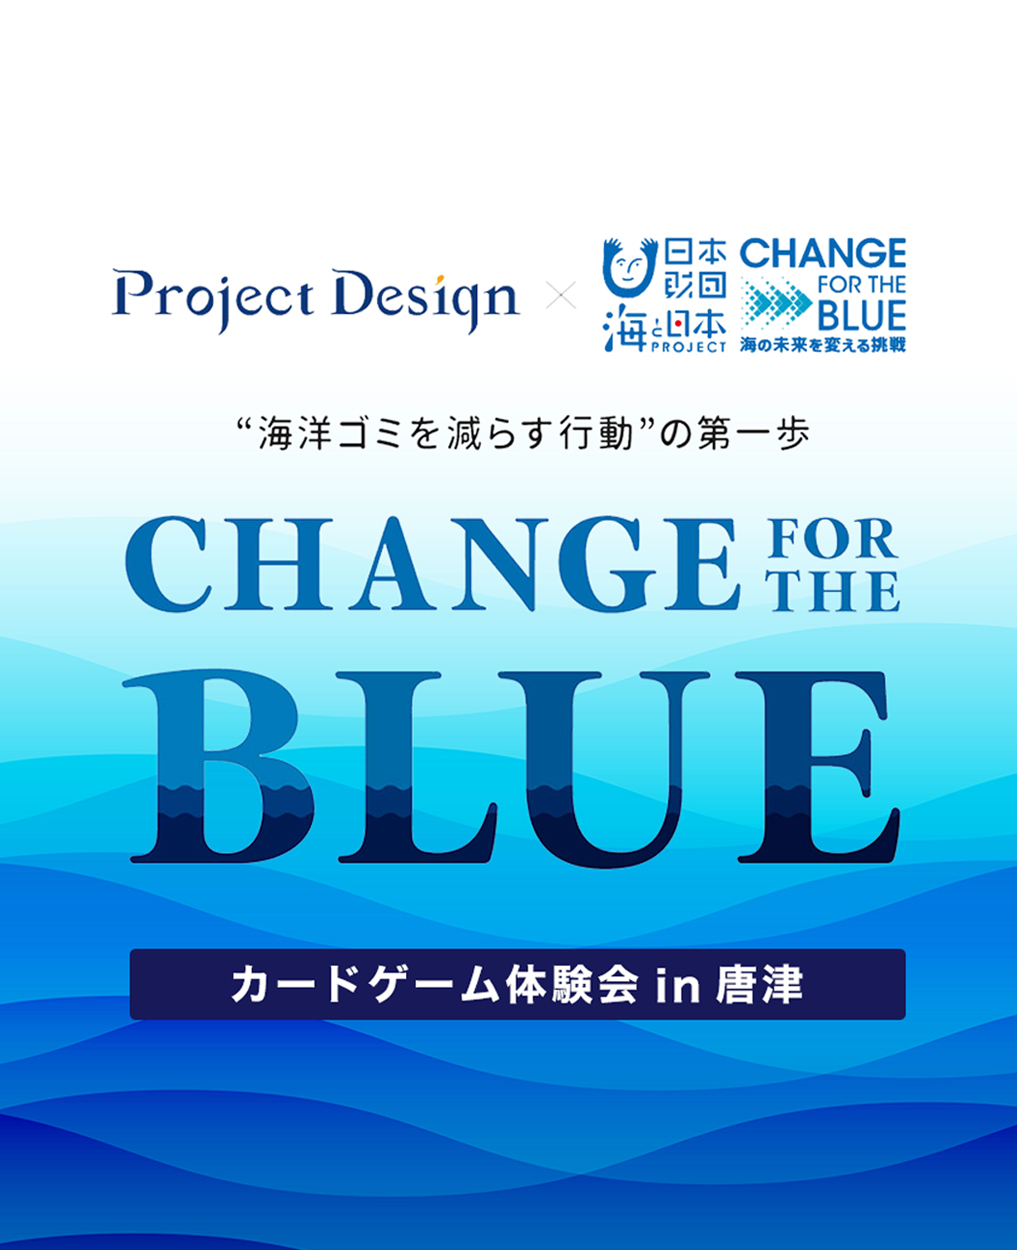 CHANGE FOR THE BLUE